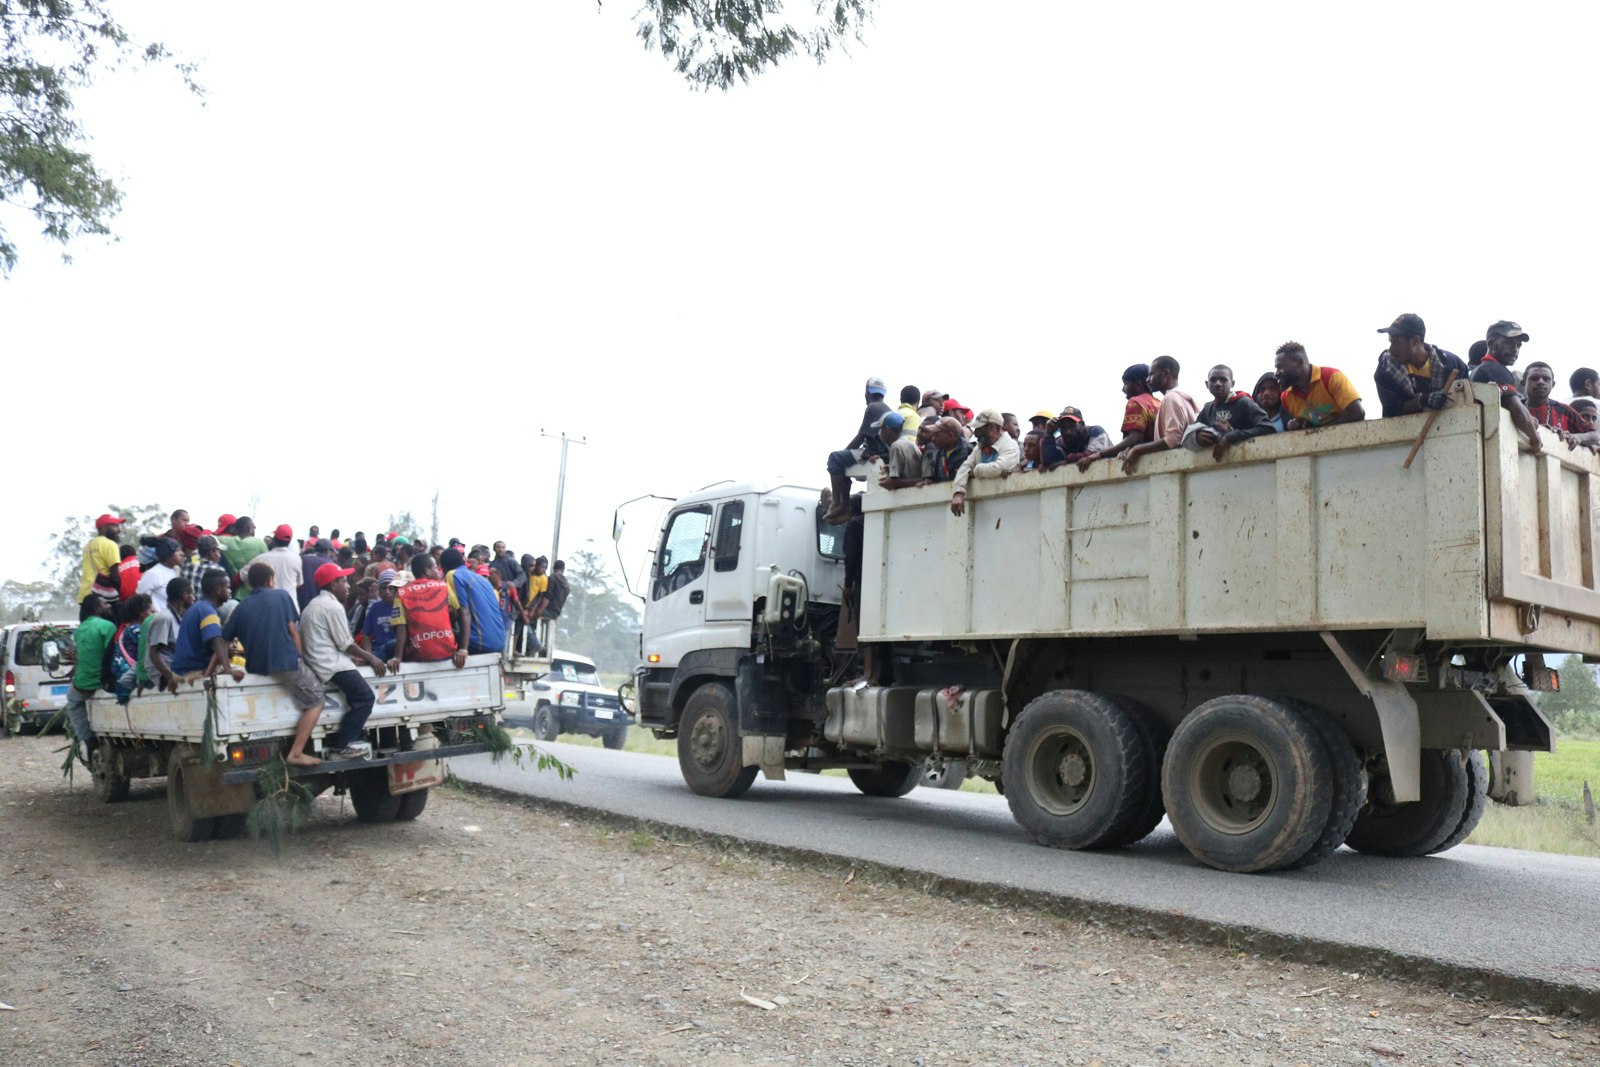 A pickup truck and a dump truck with crowds of Pasifika men piled on the back of each, driving down a narrow dirt highway in Papua New Guinea.